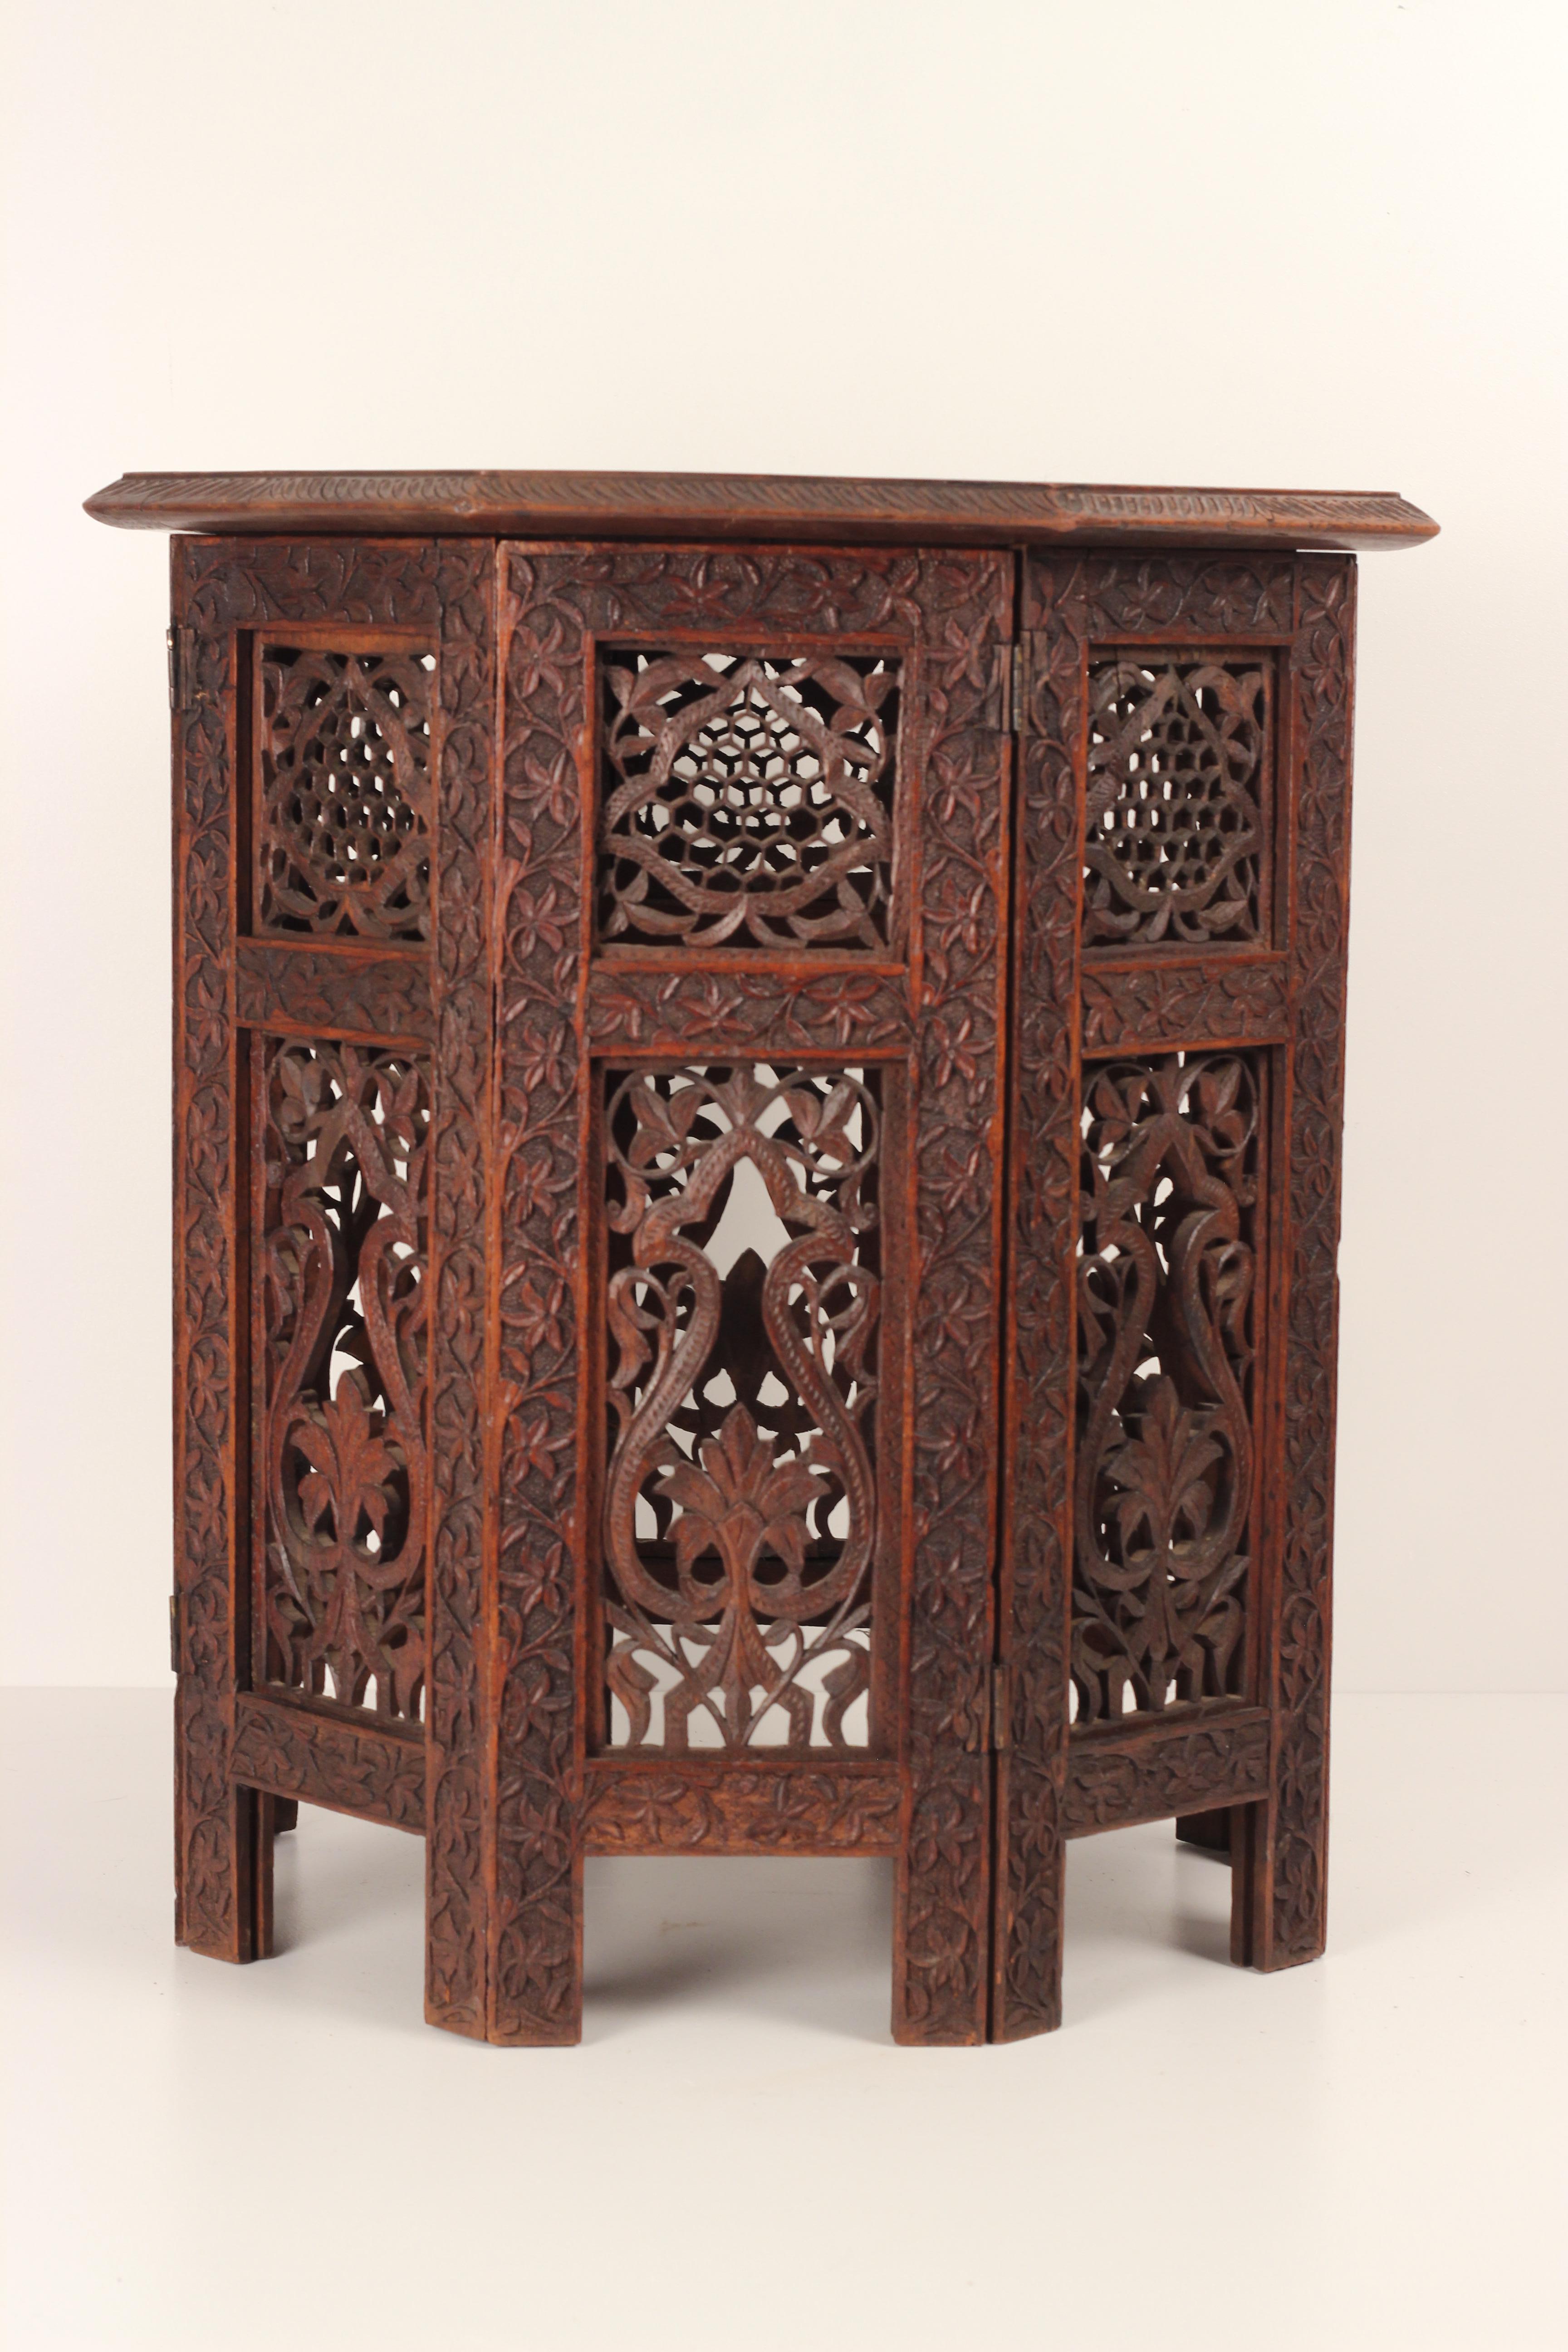 Antique Ottoman side table made around the end of the 19th century from Northern Africa. An ornately carved geometric design with delicate Bone flowers in the Style of the Ottomans. This Octagonale table serves as a functional and practical side